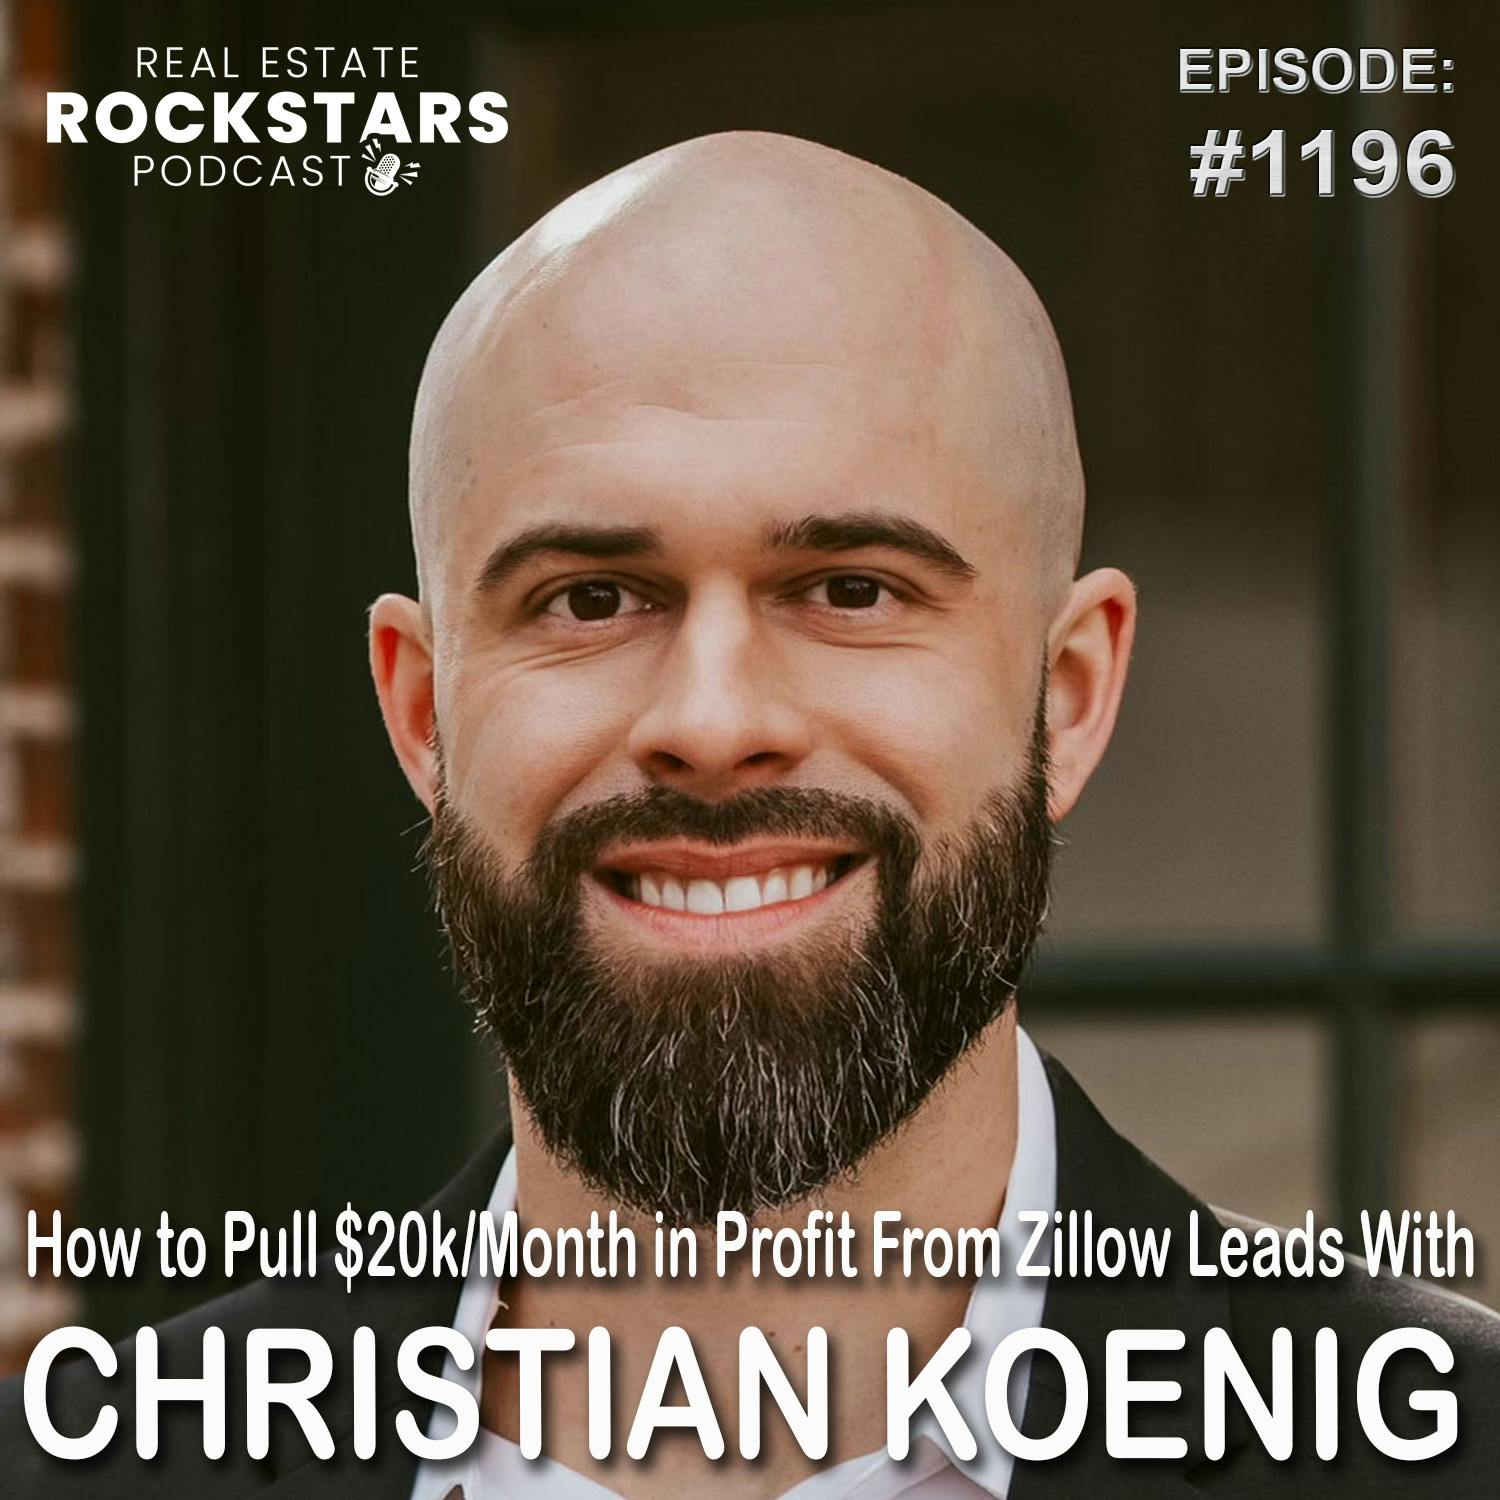 1196: How to Pull $20k/Month in Profit From Zillow Leads With Christian Koenig